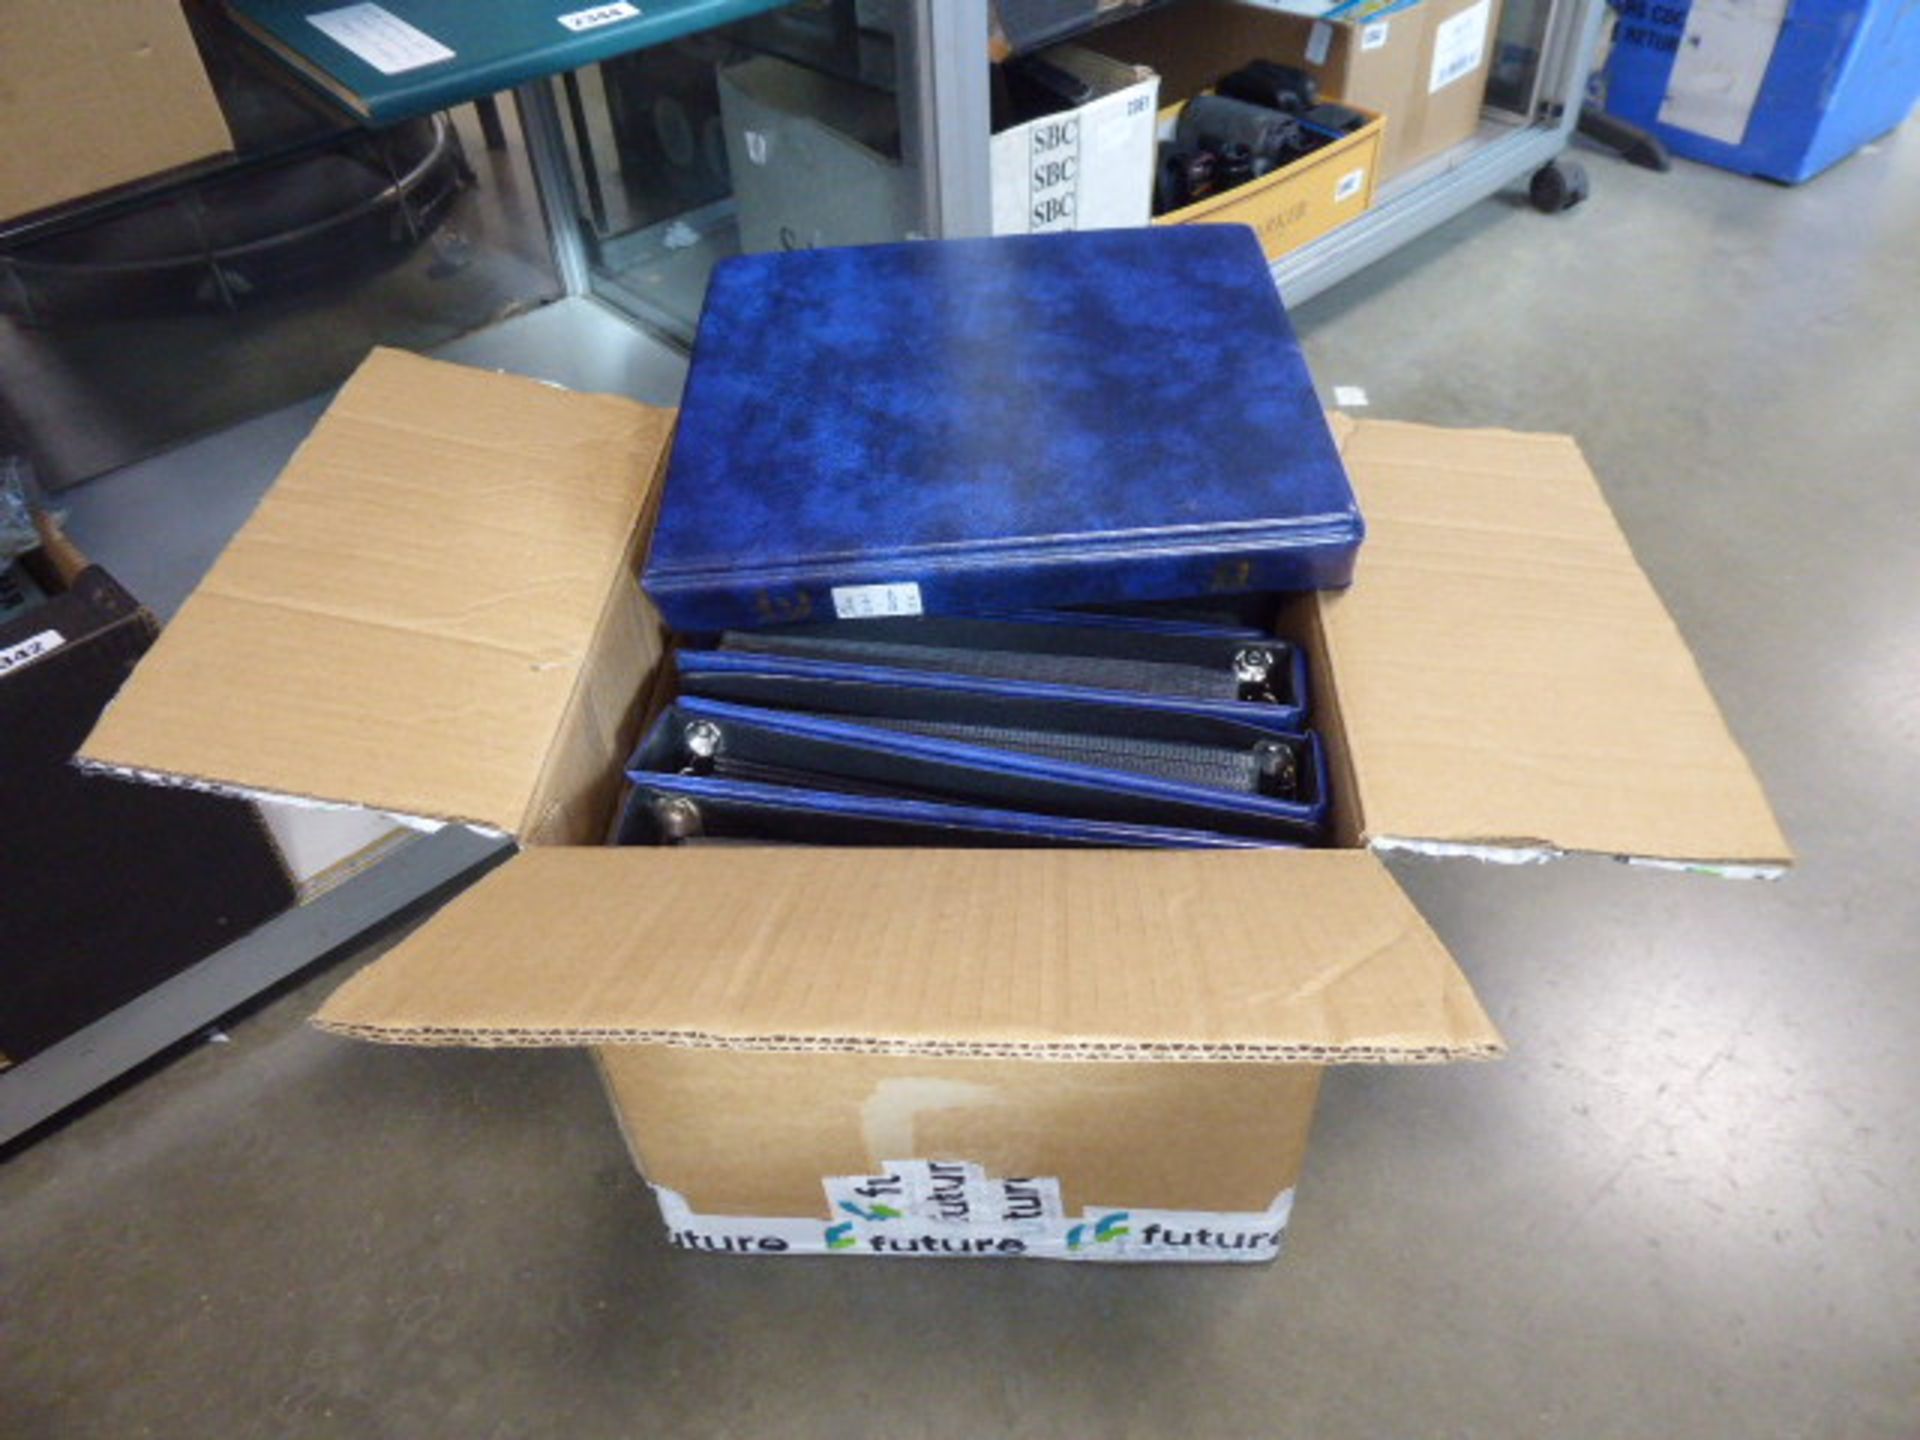 6 various blue Stanley Gibbons binders in box containing first day covers